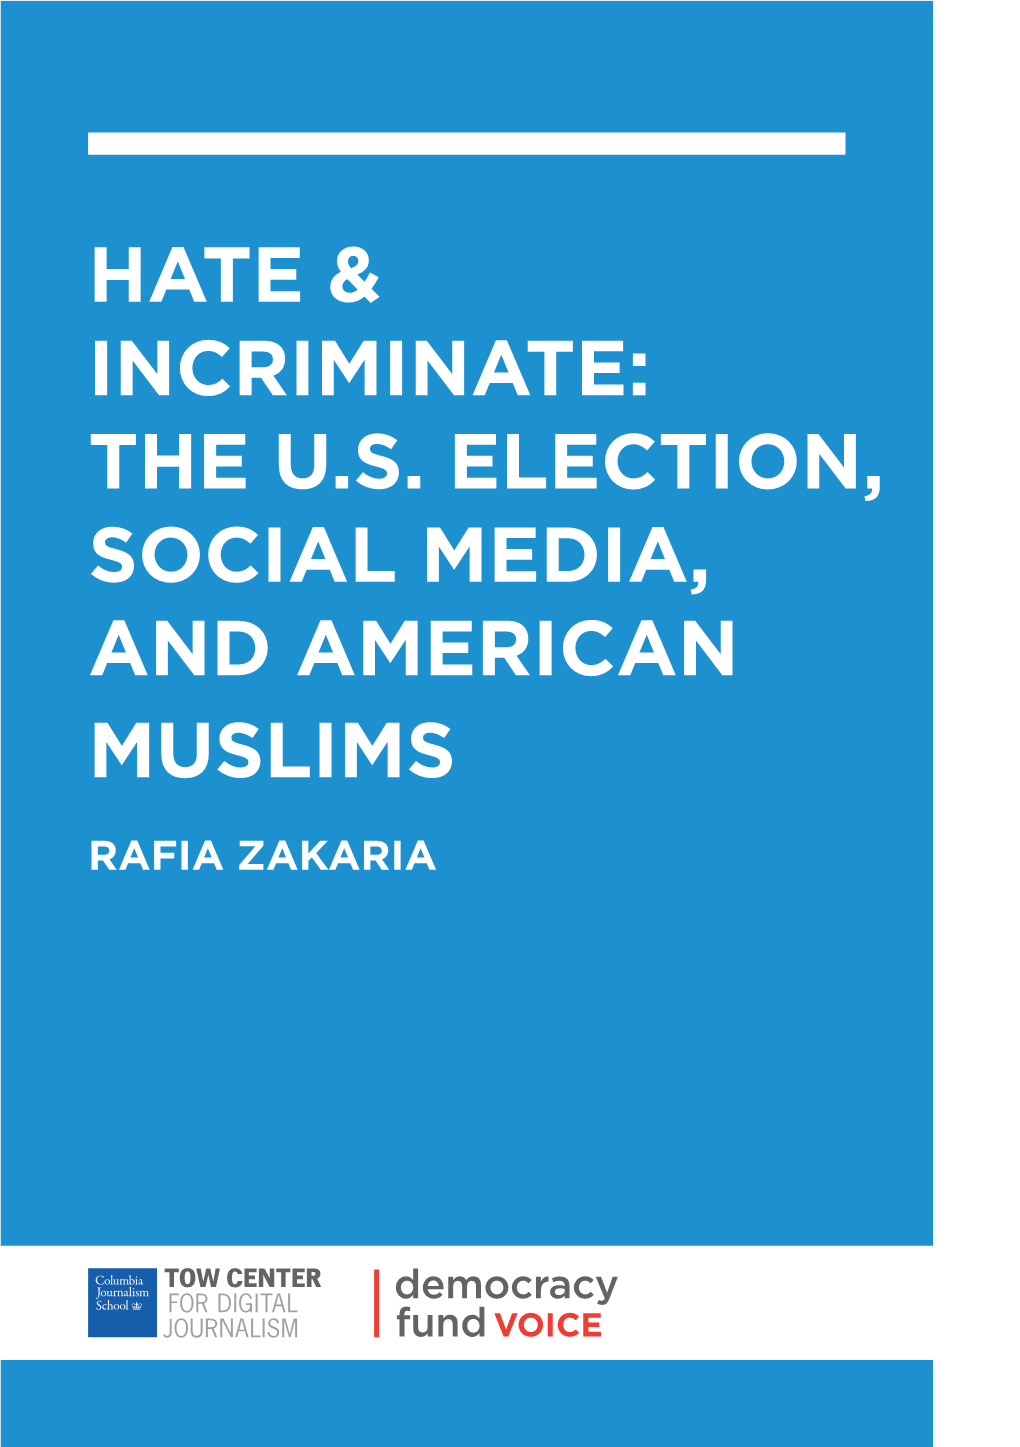 Hate & Incriminate: the U.S. Election, Social Media, and American Muslims